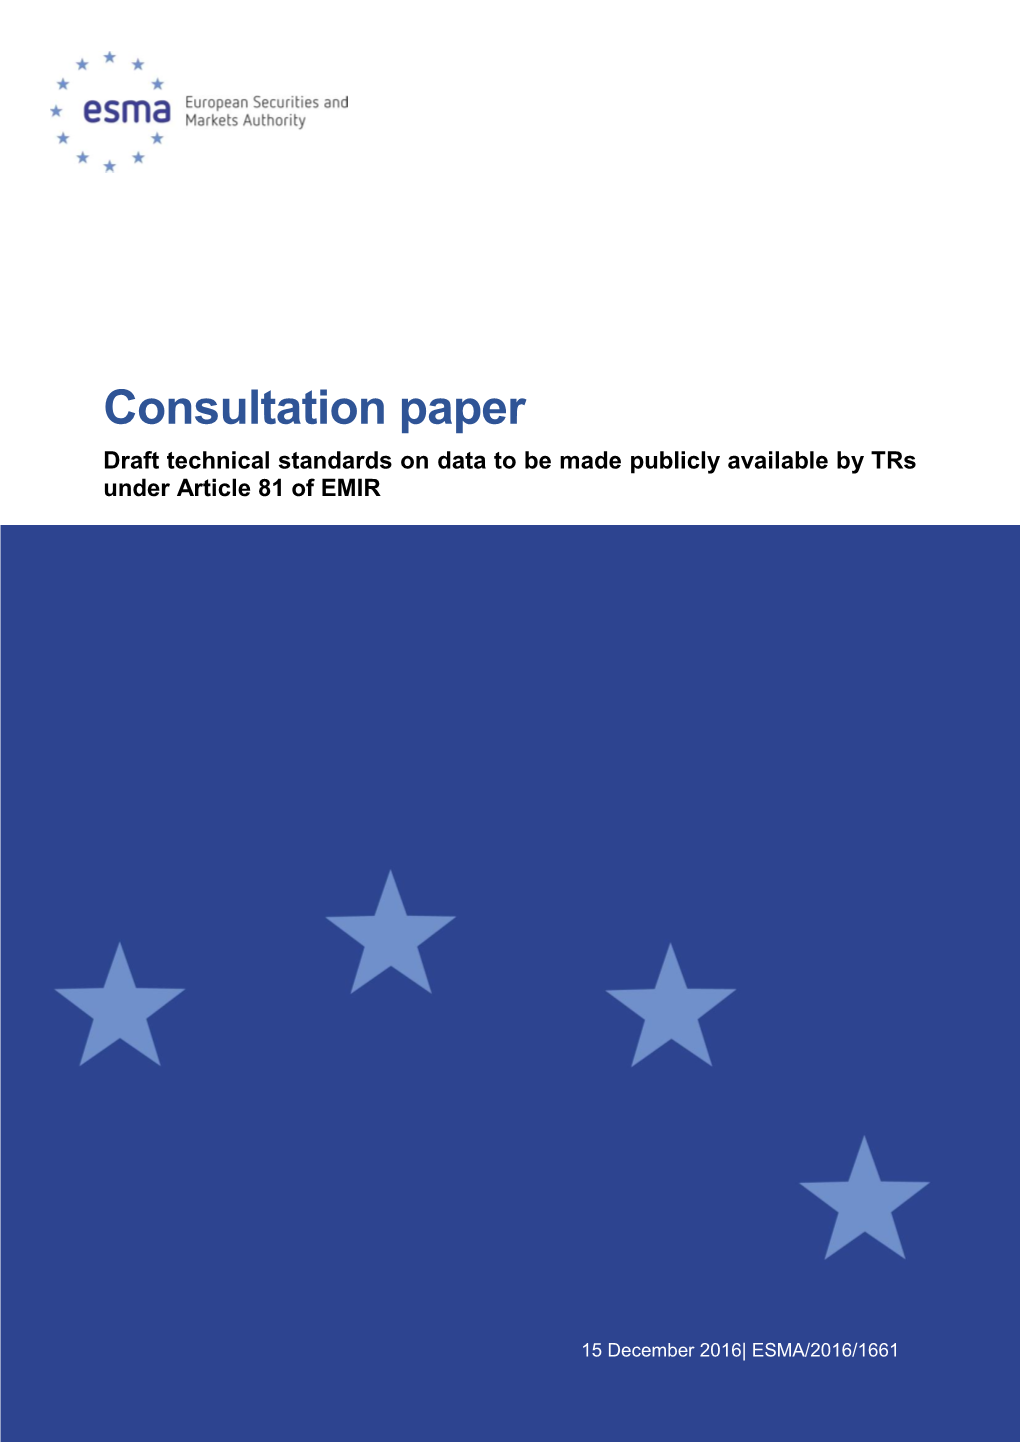 Consultation Paper Draft Technical Standards on Data to Be Made Publicly Available by Trs Under Article 81 of EMIR